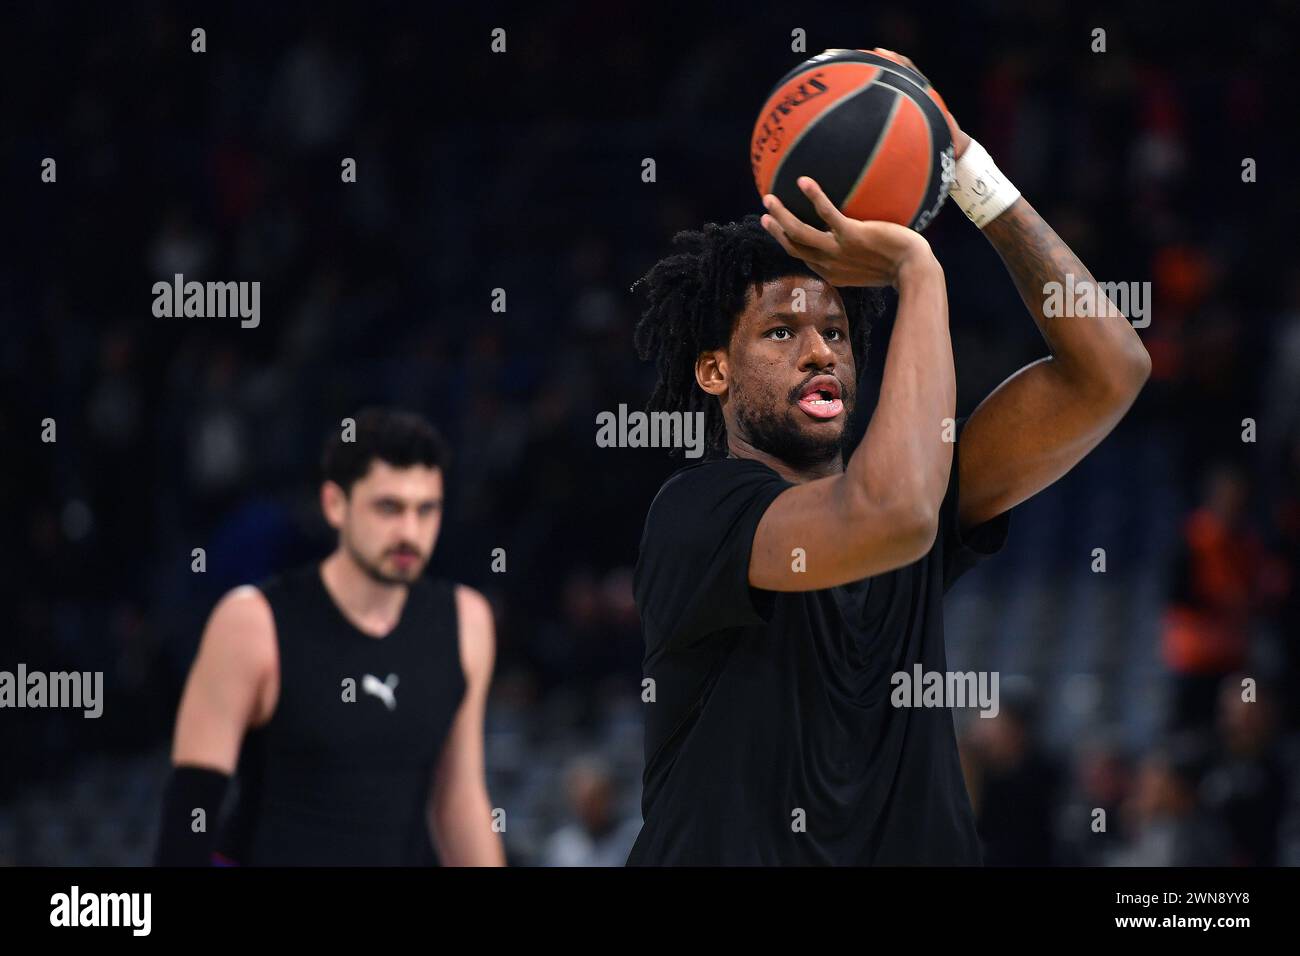 Belgrade, Serbia, 29 February, 2023. Dan Oturu of Anadolu Efes Istanbul warms up during the 2023/2024 Turkish Airlines EuroLeague, Round 27 match between Partizan Mozzart Bet Belgrade and Anadolu Efes Istanbul at Stark Arena in Belgrade, Serbia. February 29, 2023. Credit: Nikola Krstic/Alamy Stock Photo